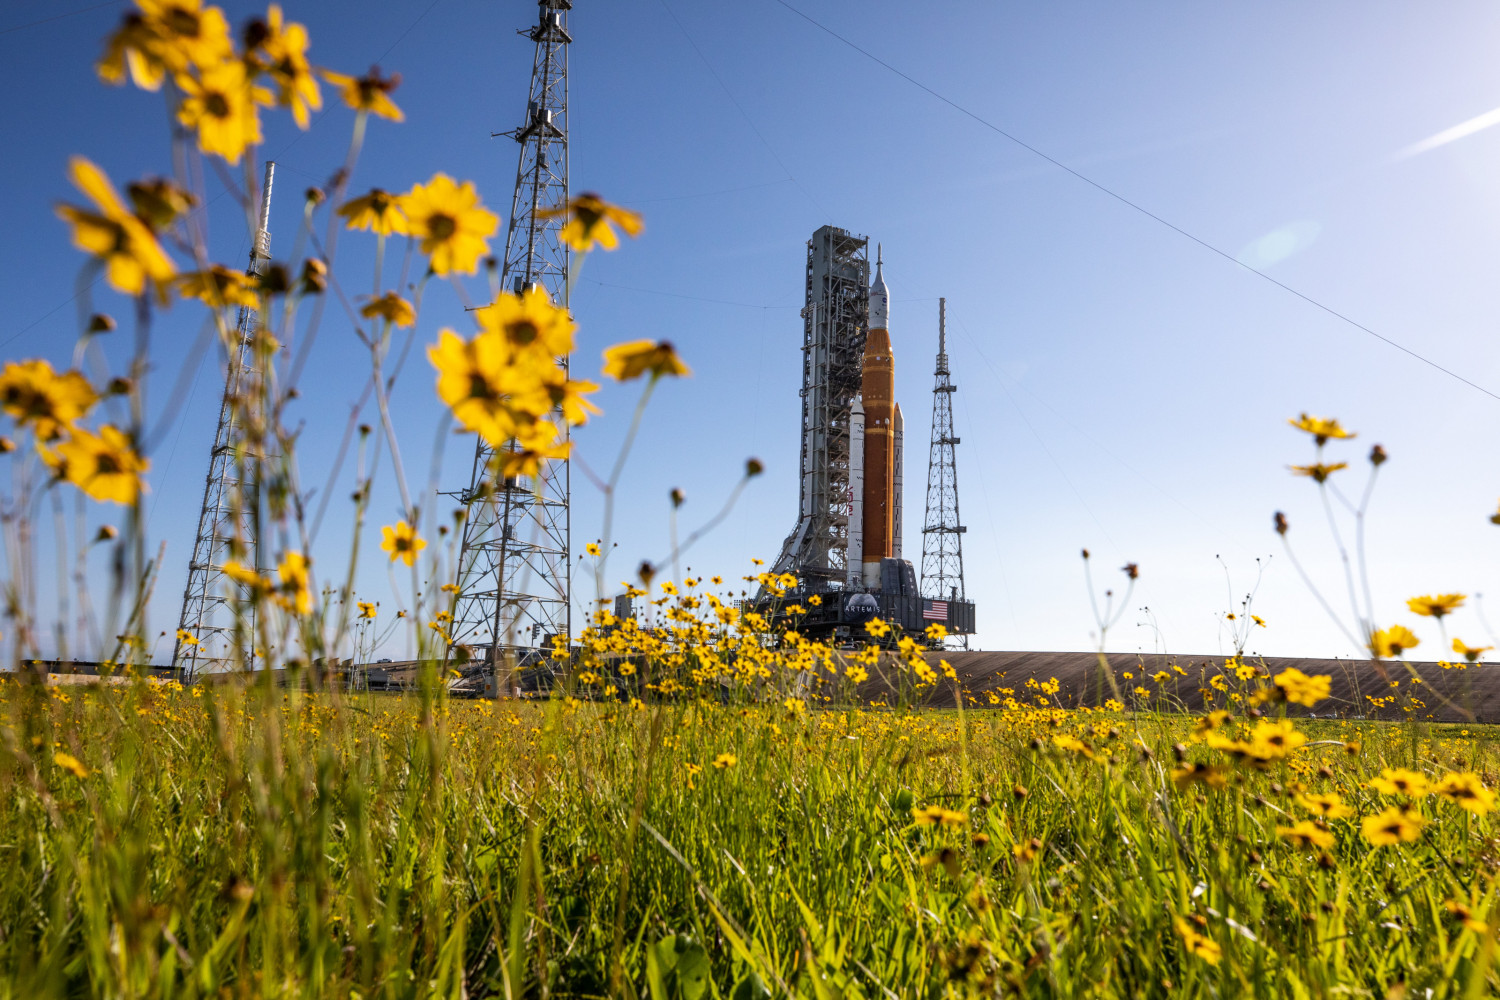 Wildflowers at NASA Kennedy Space Center